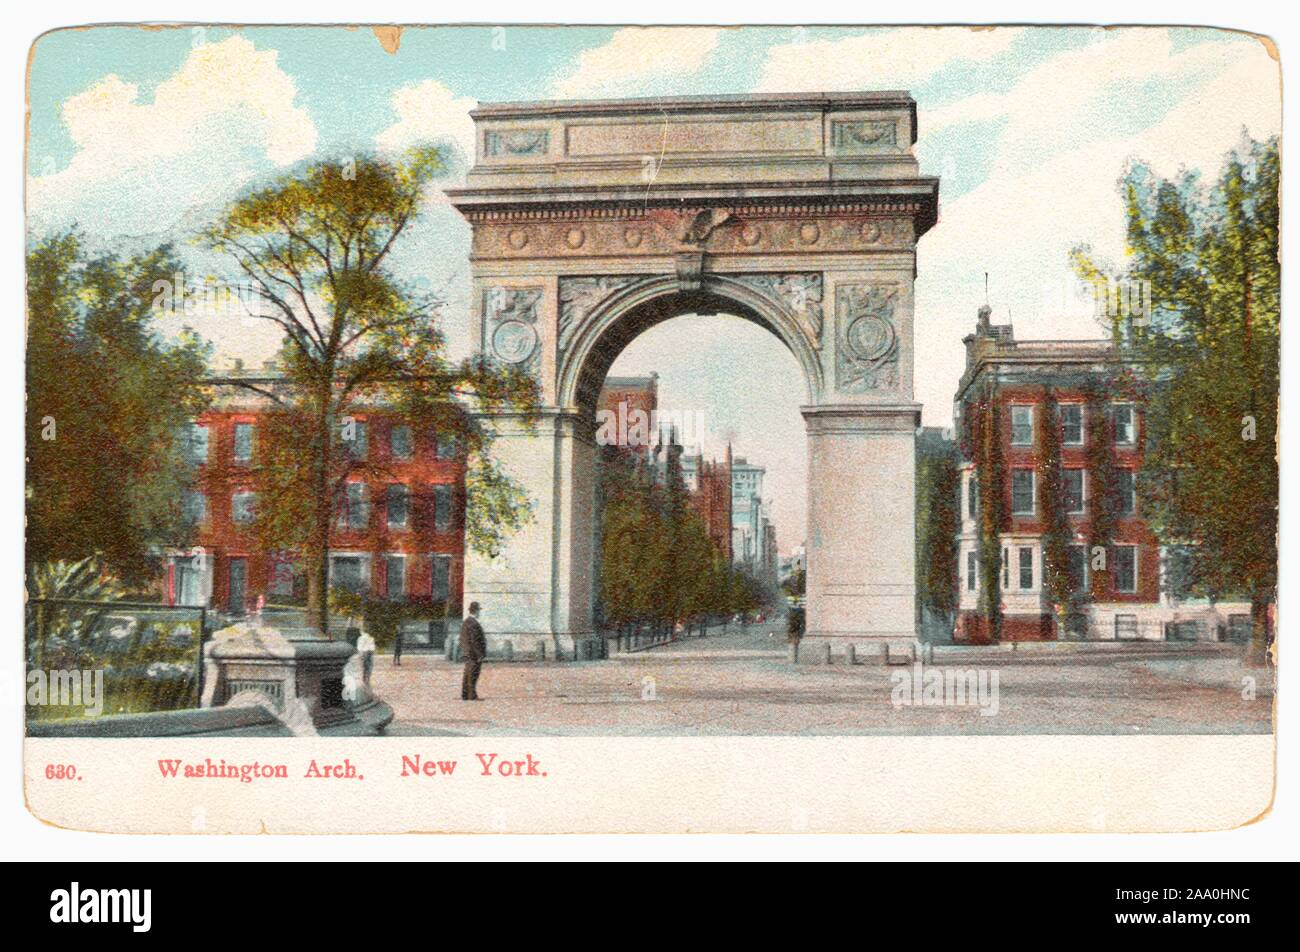 Illustrated postcard of the Washington Arch, New York City, published by Photo and Art Postal Card Co, 1907. From the New York Public Library. () Stock Photo